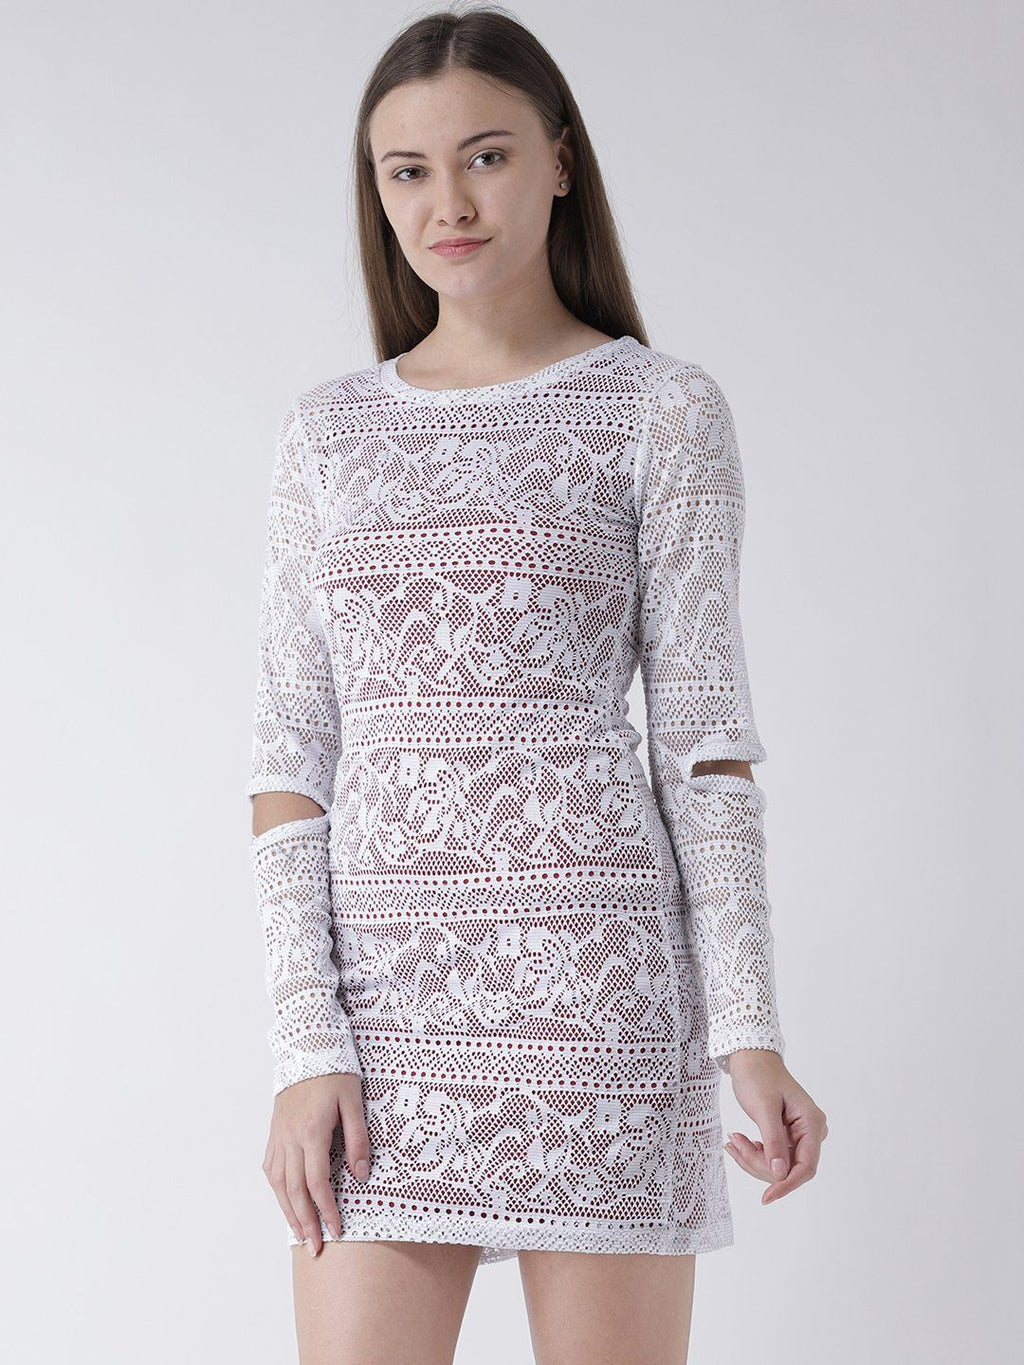 White Lace Dress with Elbow Cut-Out Detail